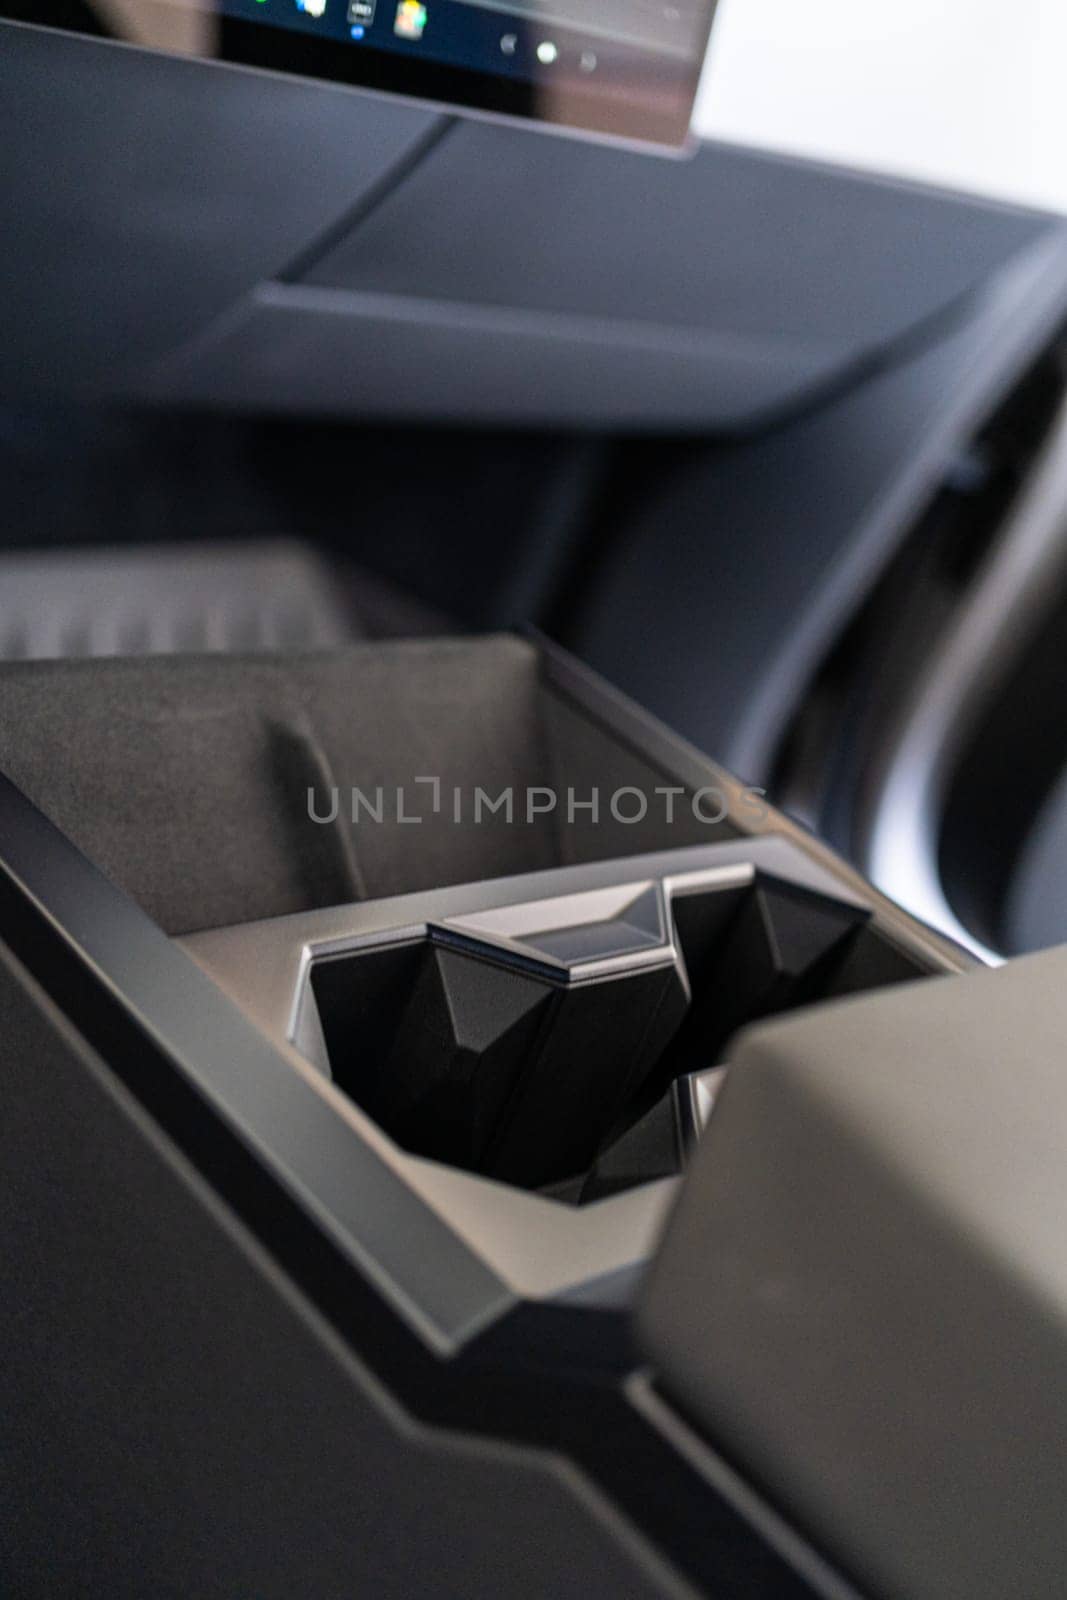 Denver, Colorado, USA-May 5, 2024-This image captures the innovative design of the cupholder inside the Tesla Cybertruck, showcasing its unique angular shapes and modern, minimalist aesthetic.